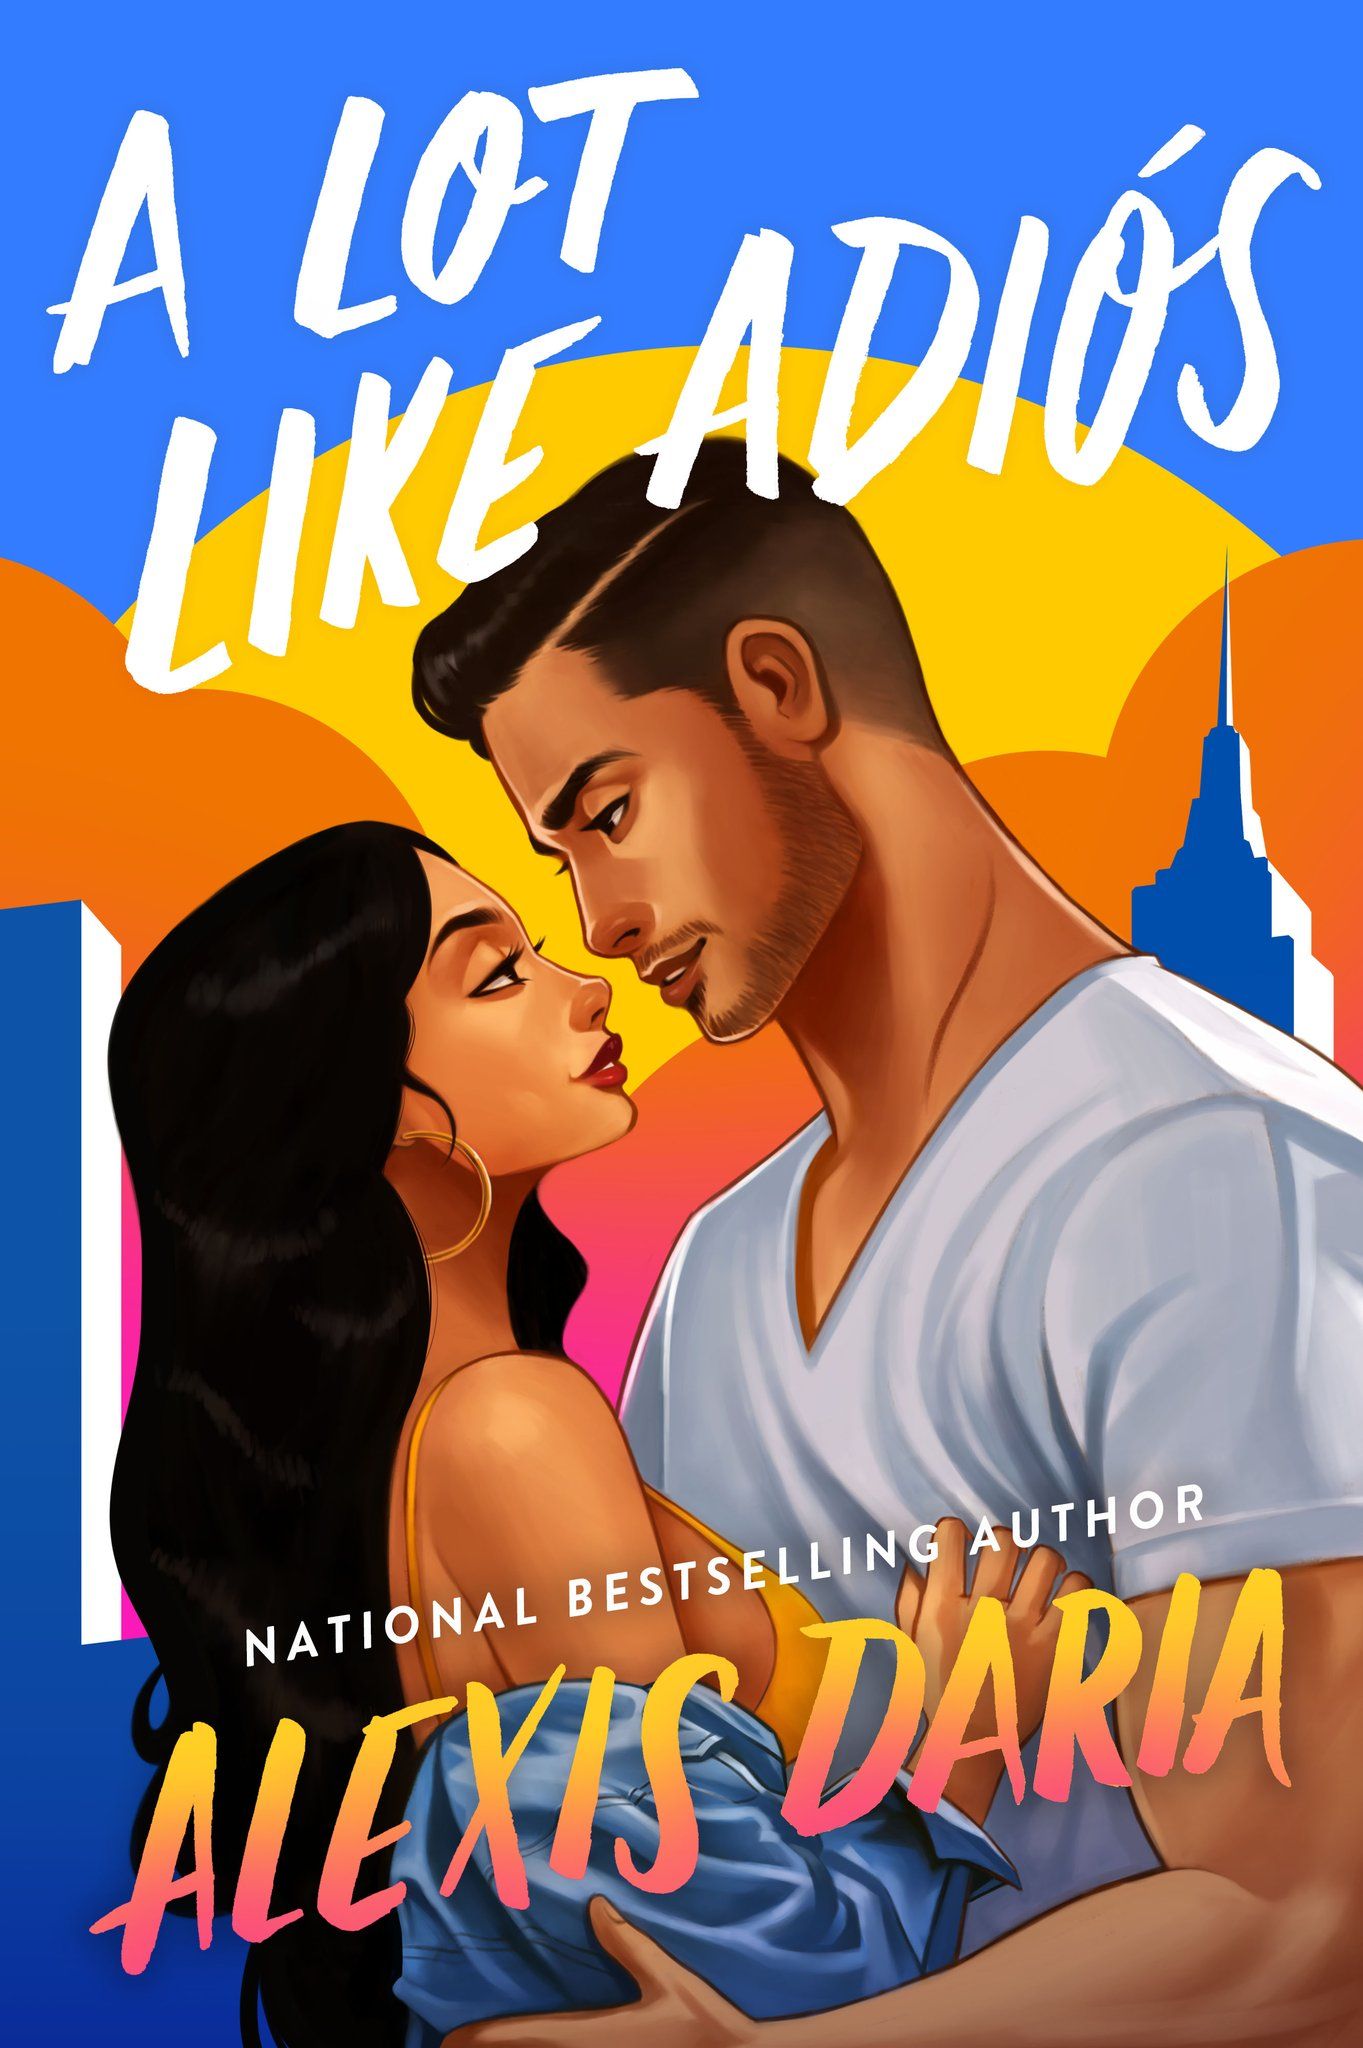 Cover of A Lot Like Adiós book